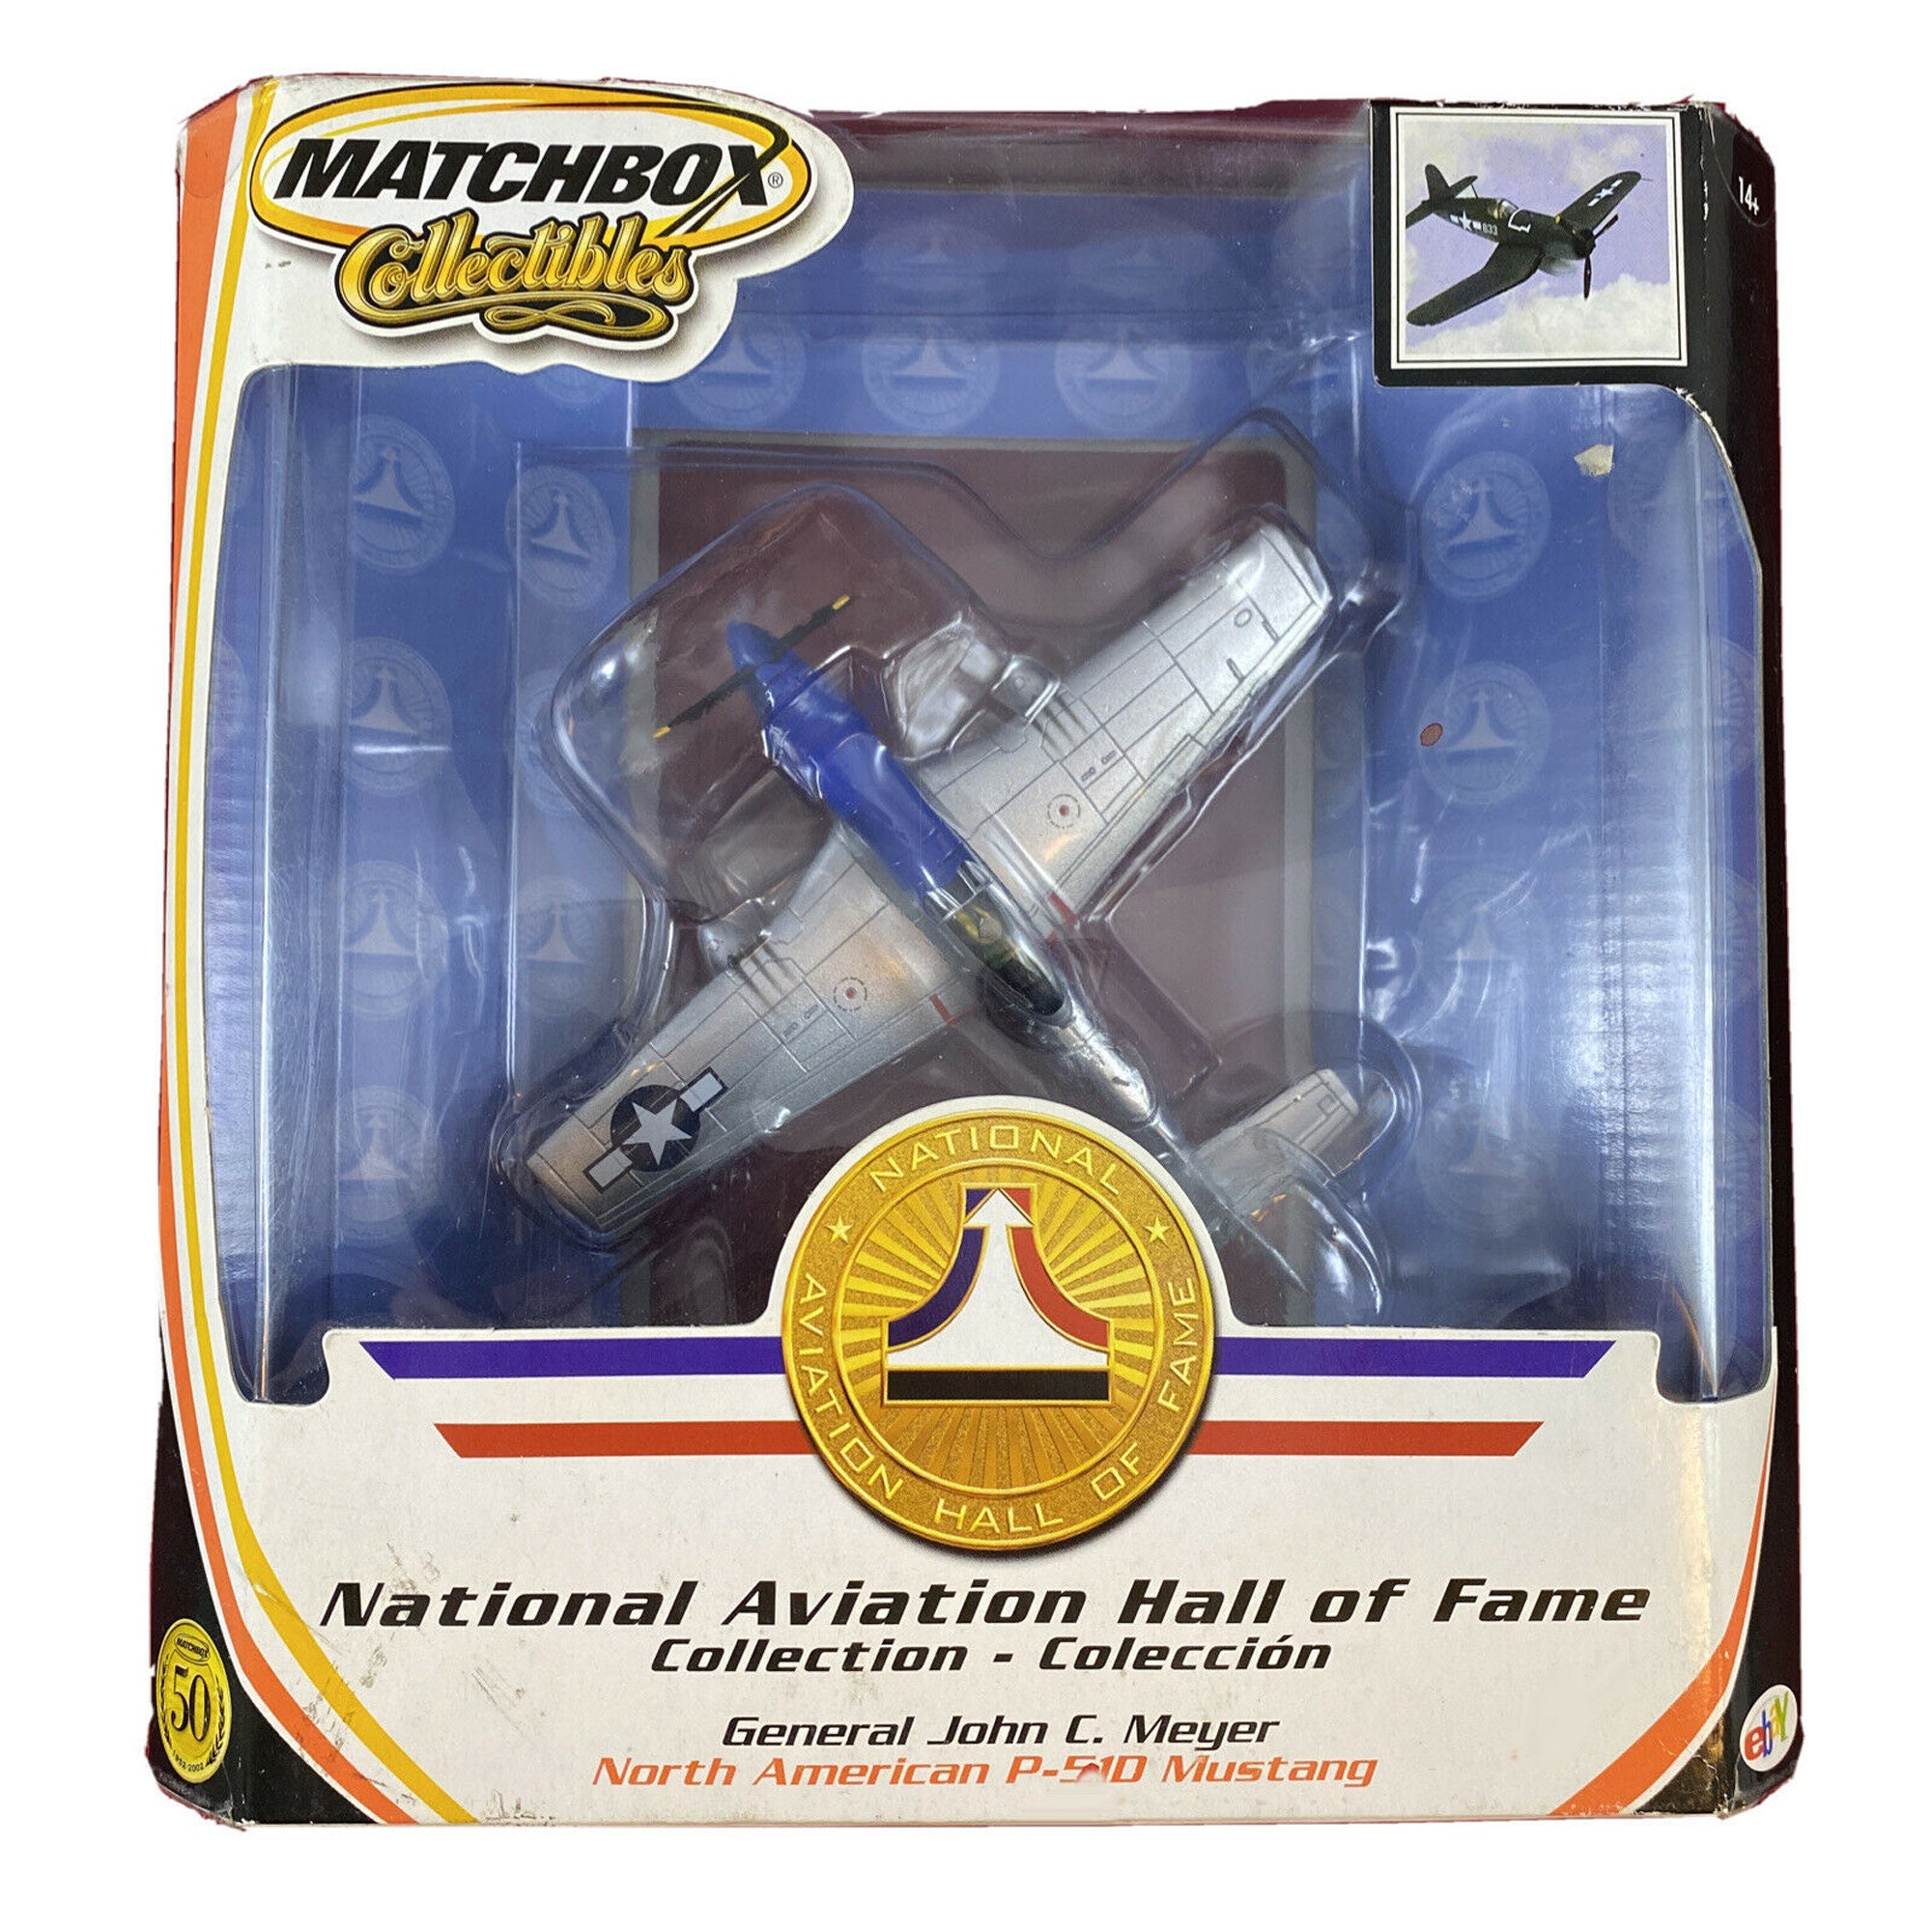 NORTH AMERICAN P51 MUSTANG NEW MATCHBOX COLLECTIBLES NATIONAL AVIATION H.O.F 